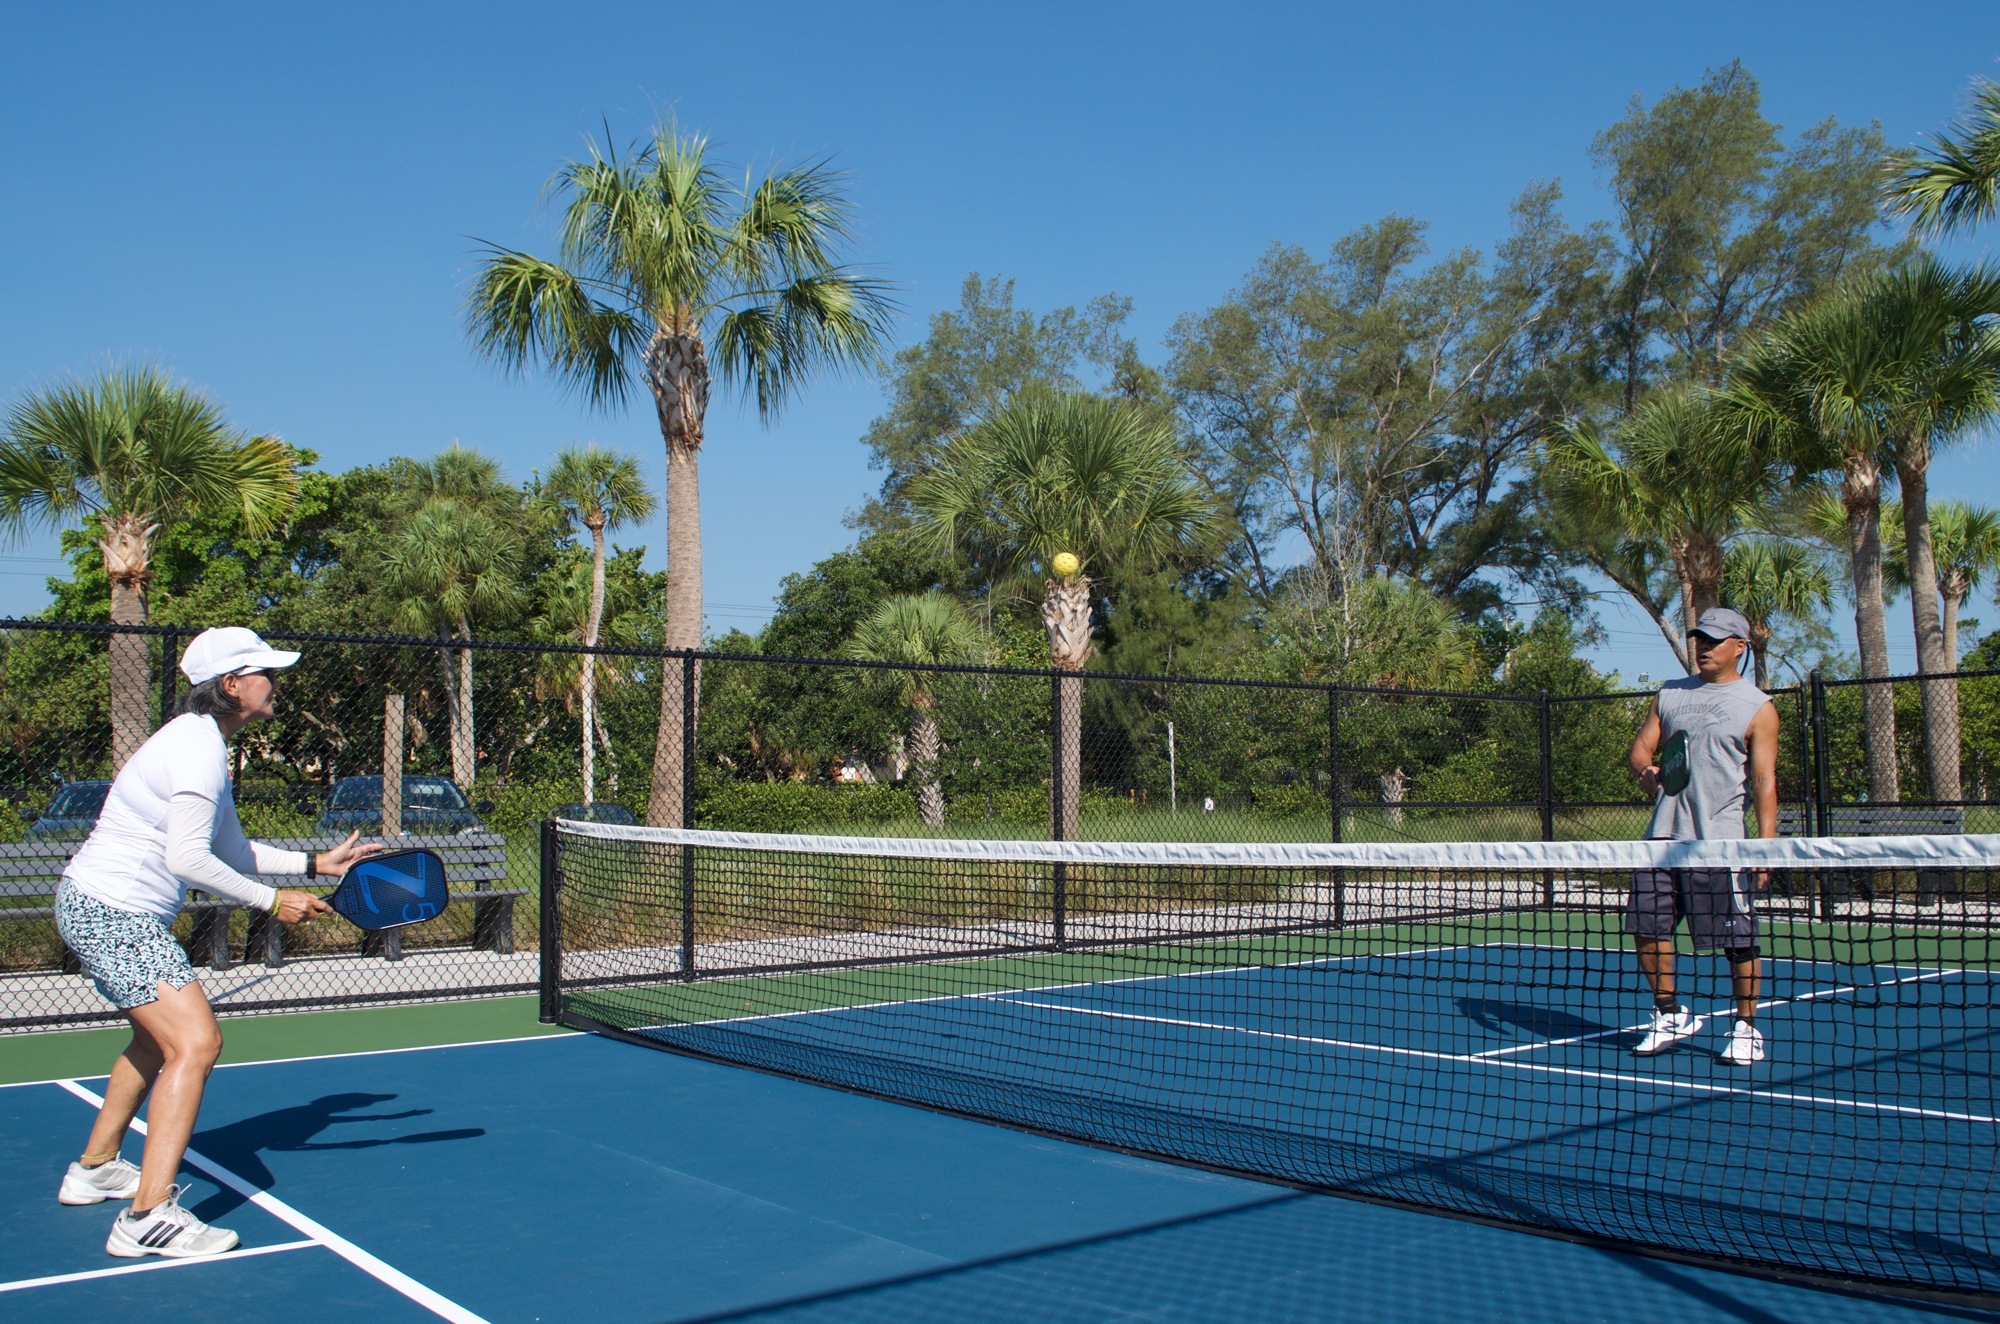 As many as nine regulation pickleball courts could be in play at Bayfront Park if the proposal is fully implemented.